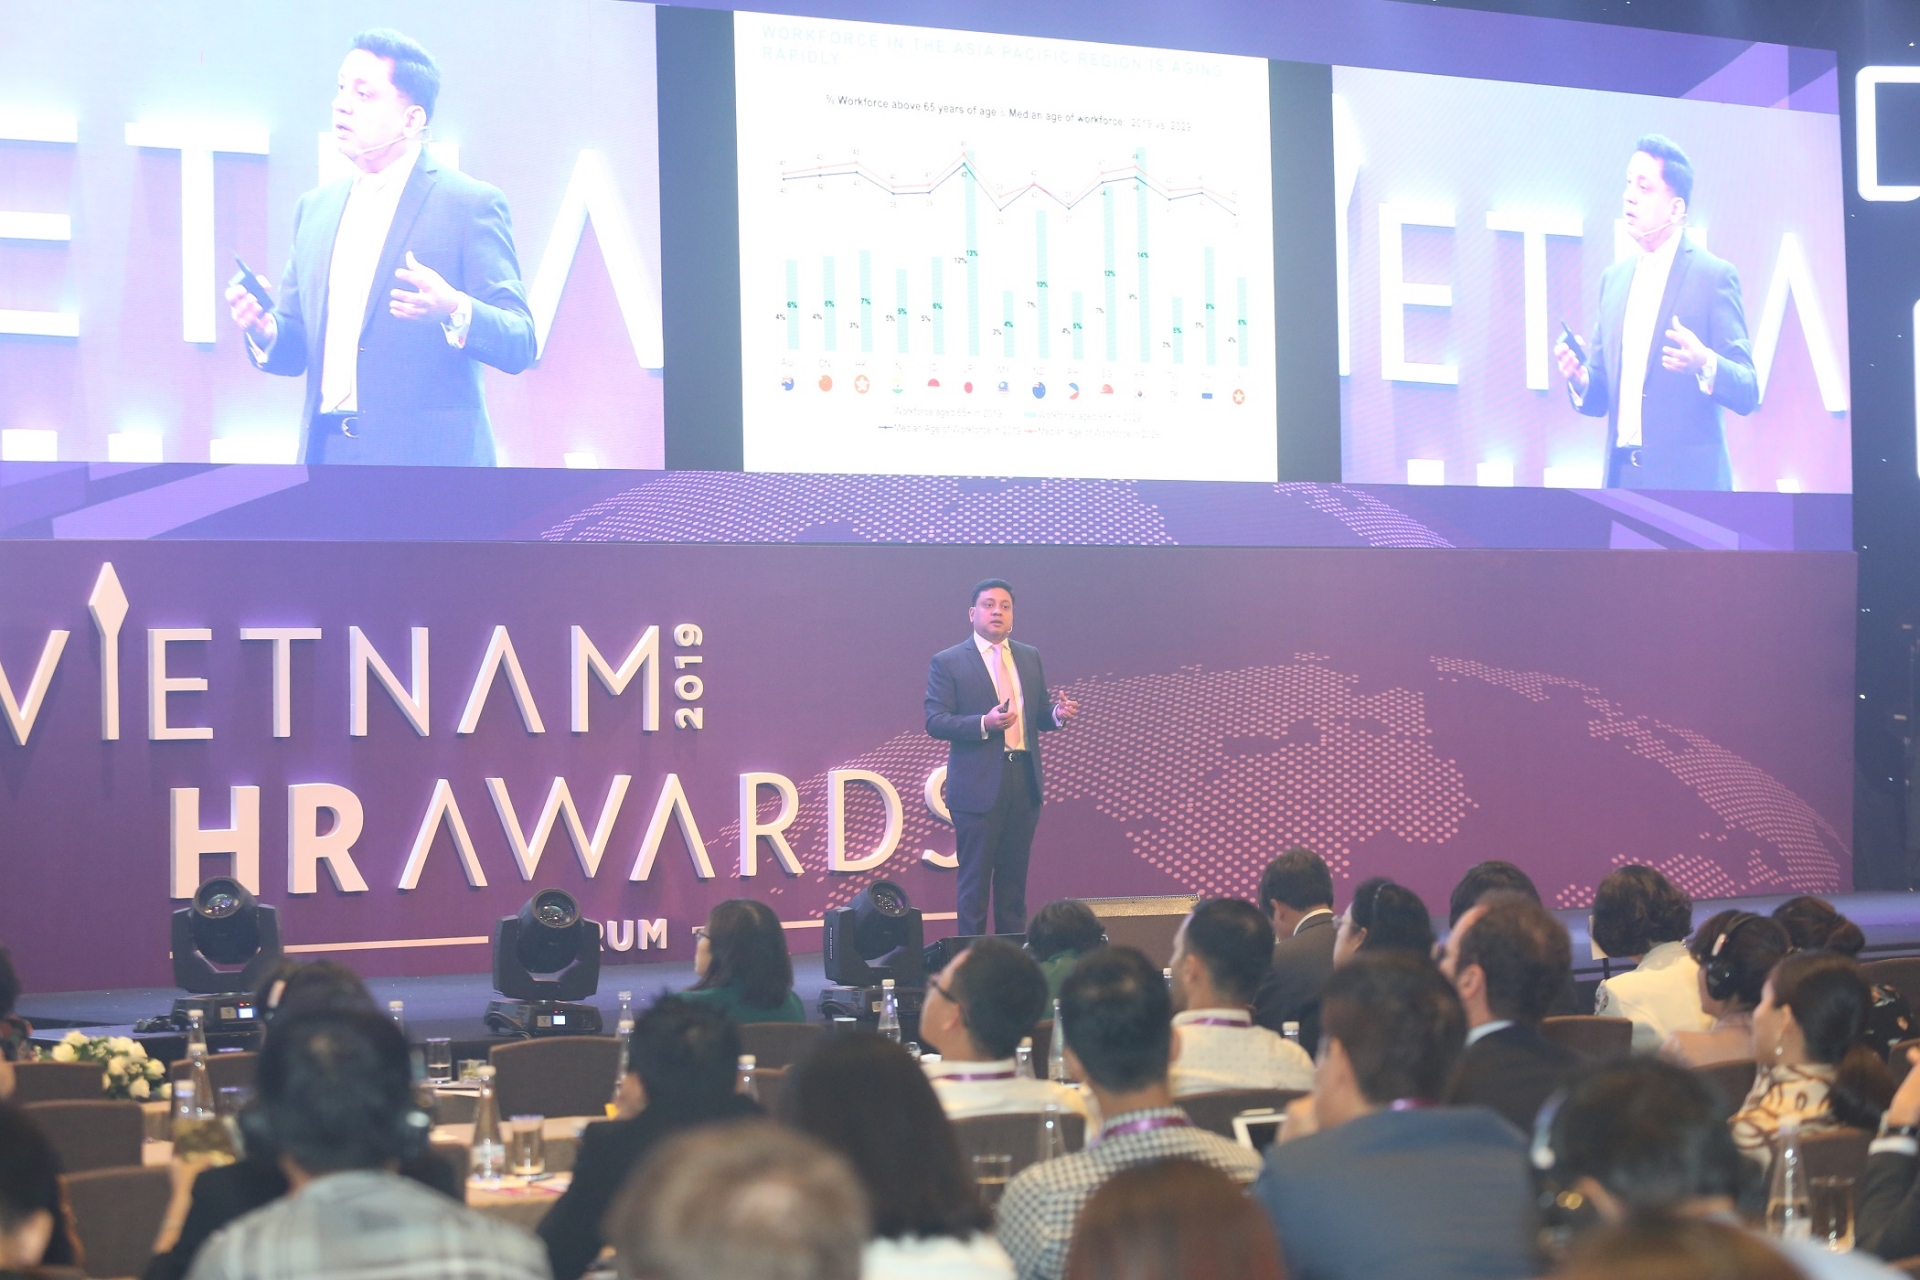 Vietnam HR Awards Forum 2019 sheds light on future of business and HR